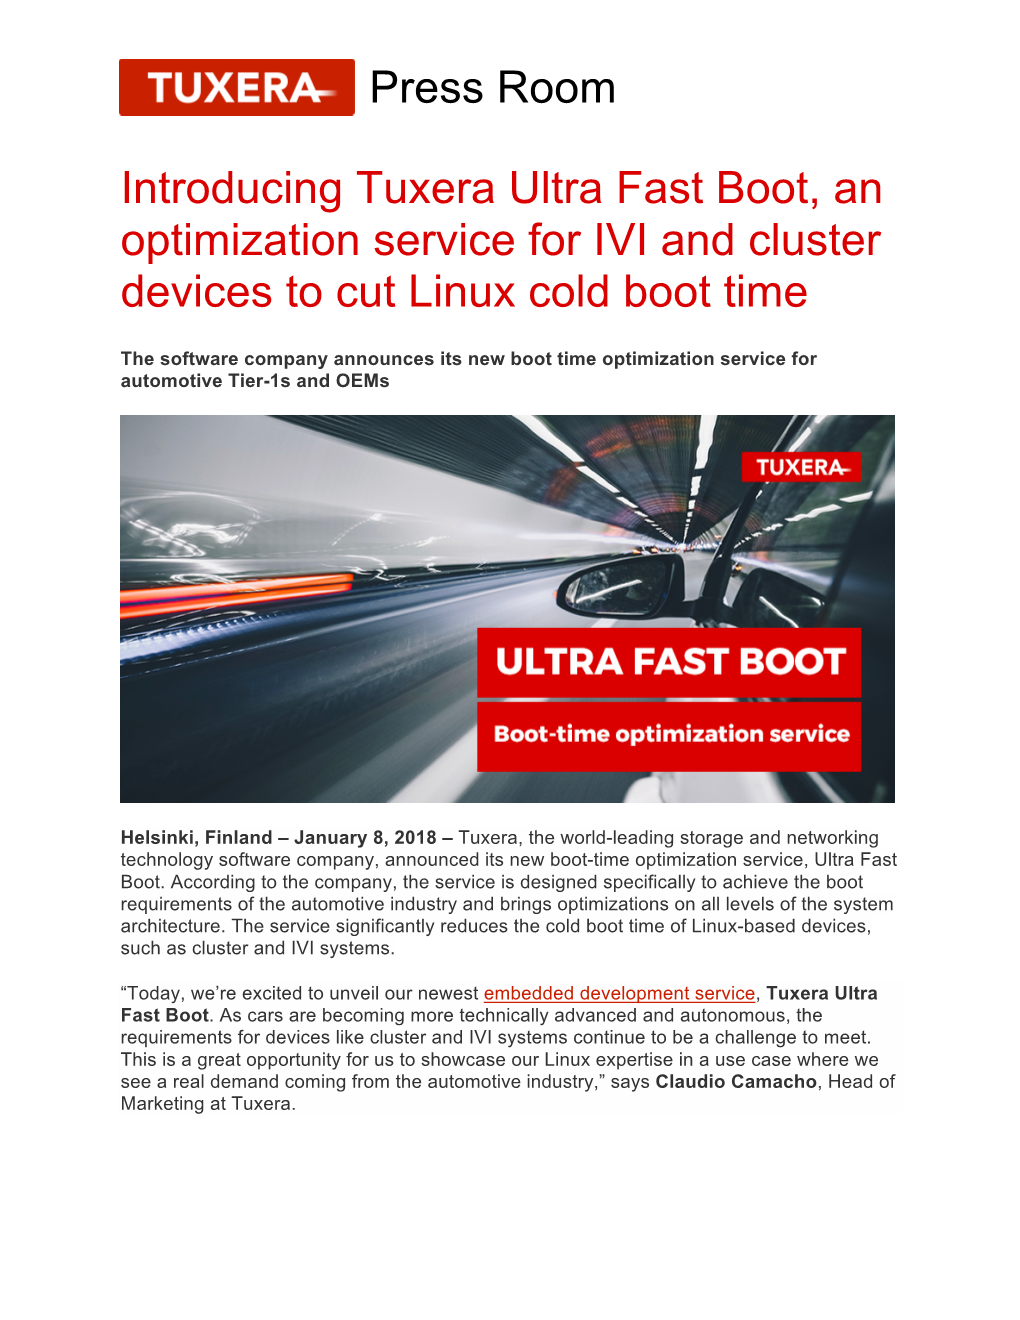 Introducing Tuxera Ultra Fast Boot, an Optimization Service for IVI and Cluster Devices to Cut Linux Cold Boot Time